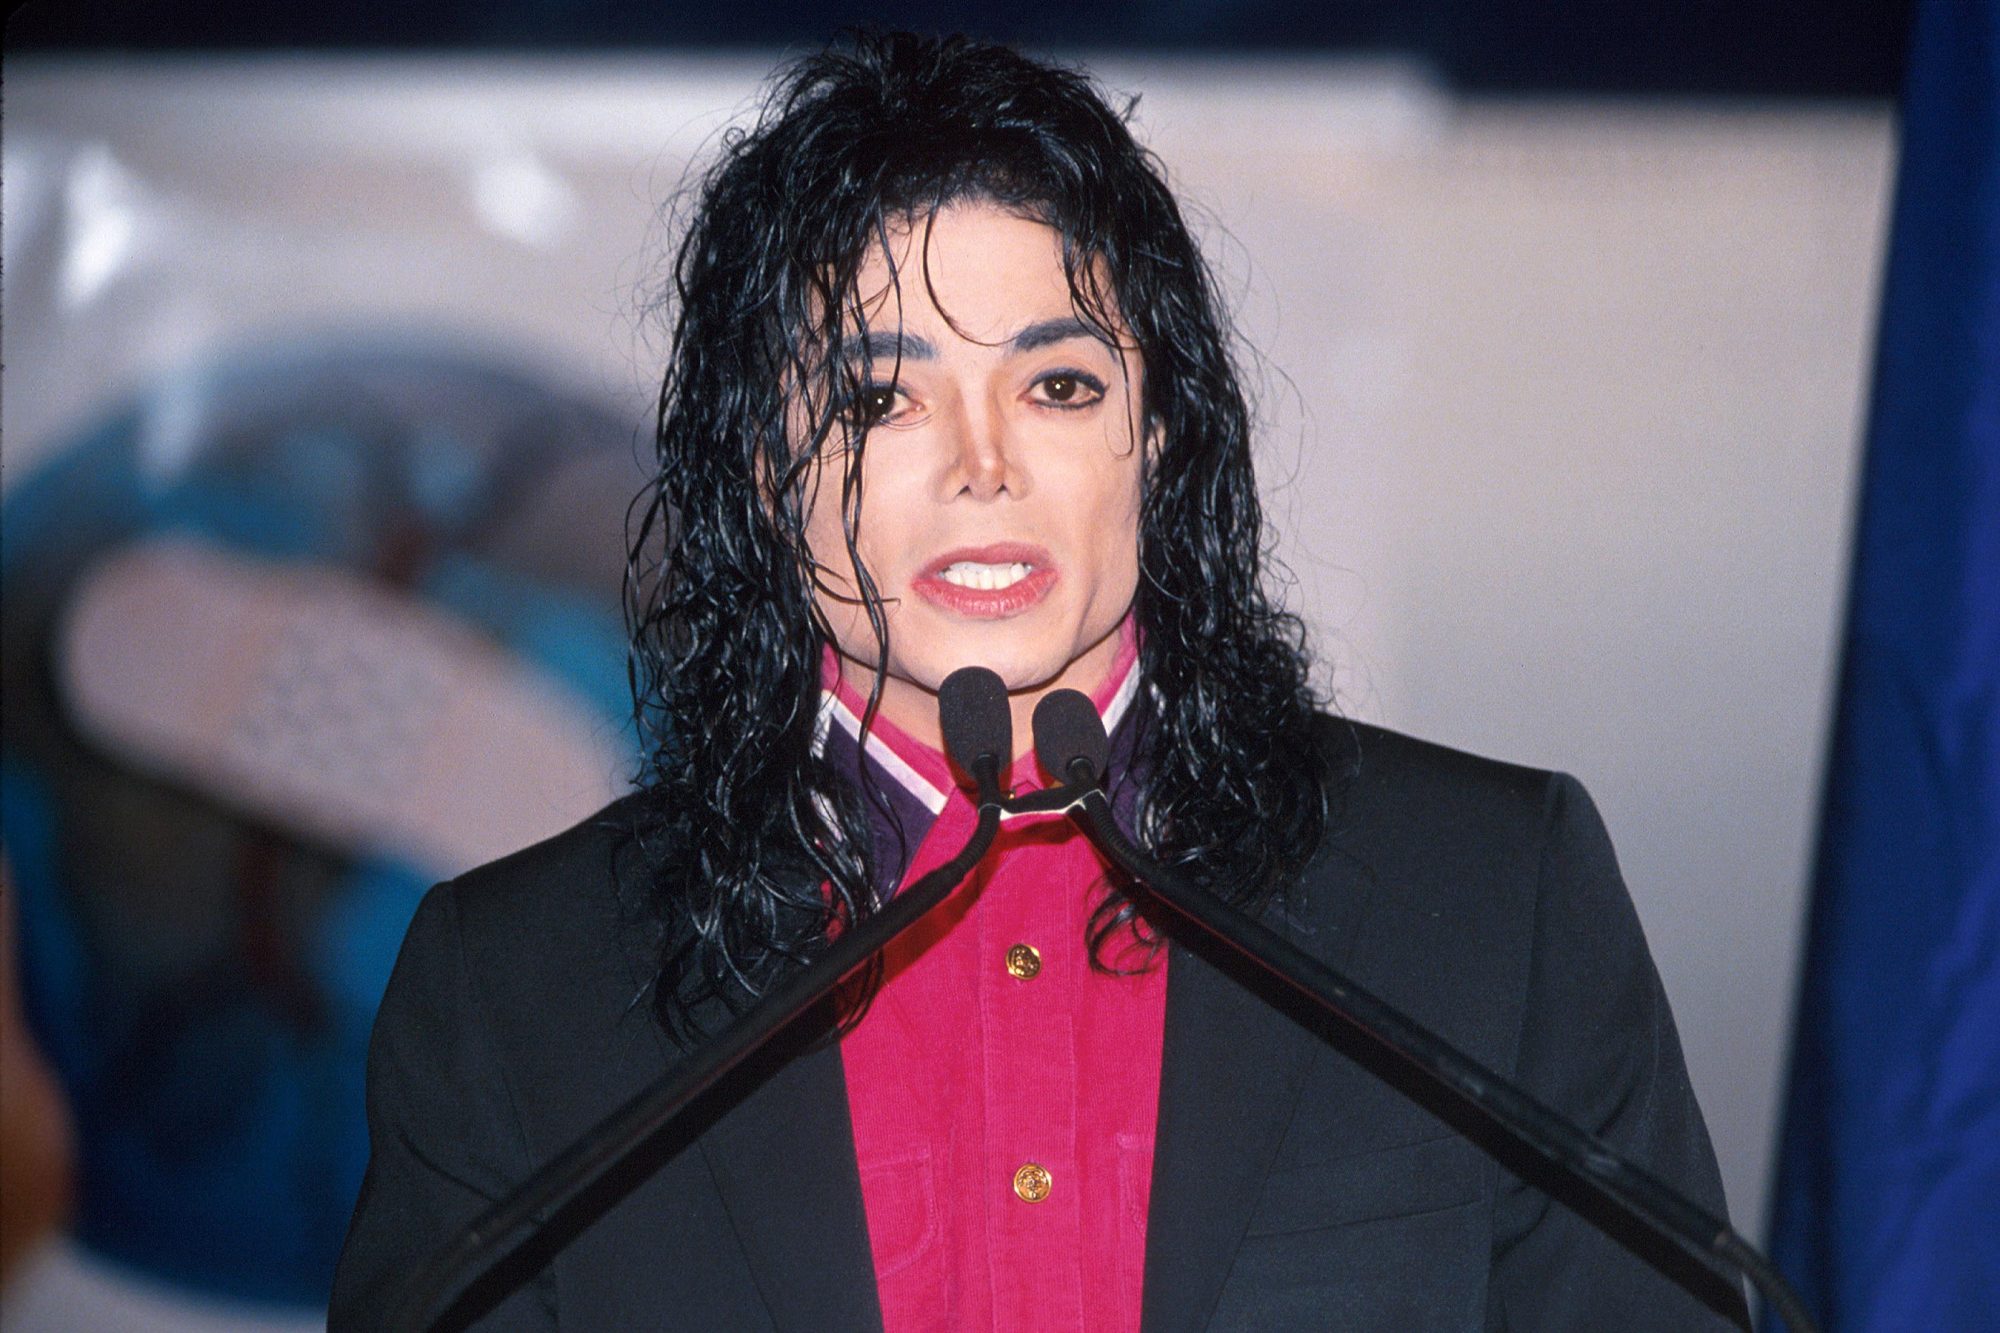 Michael Jackson At A Conference